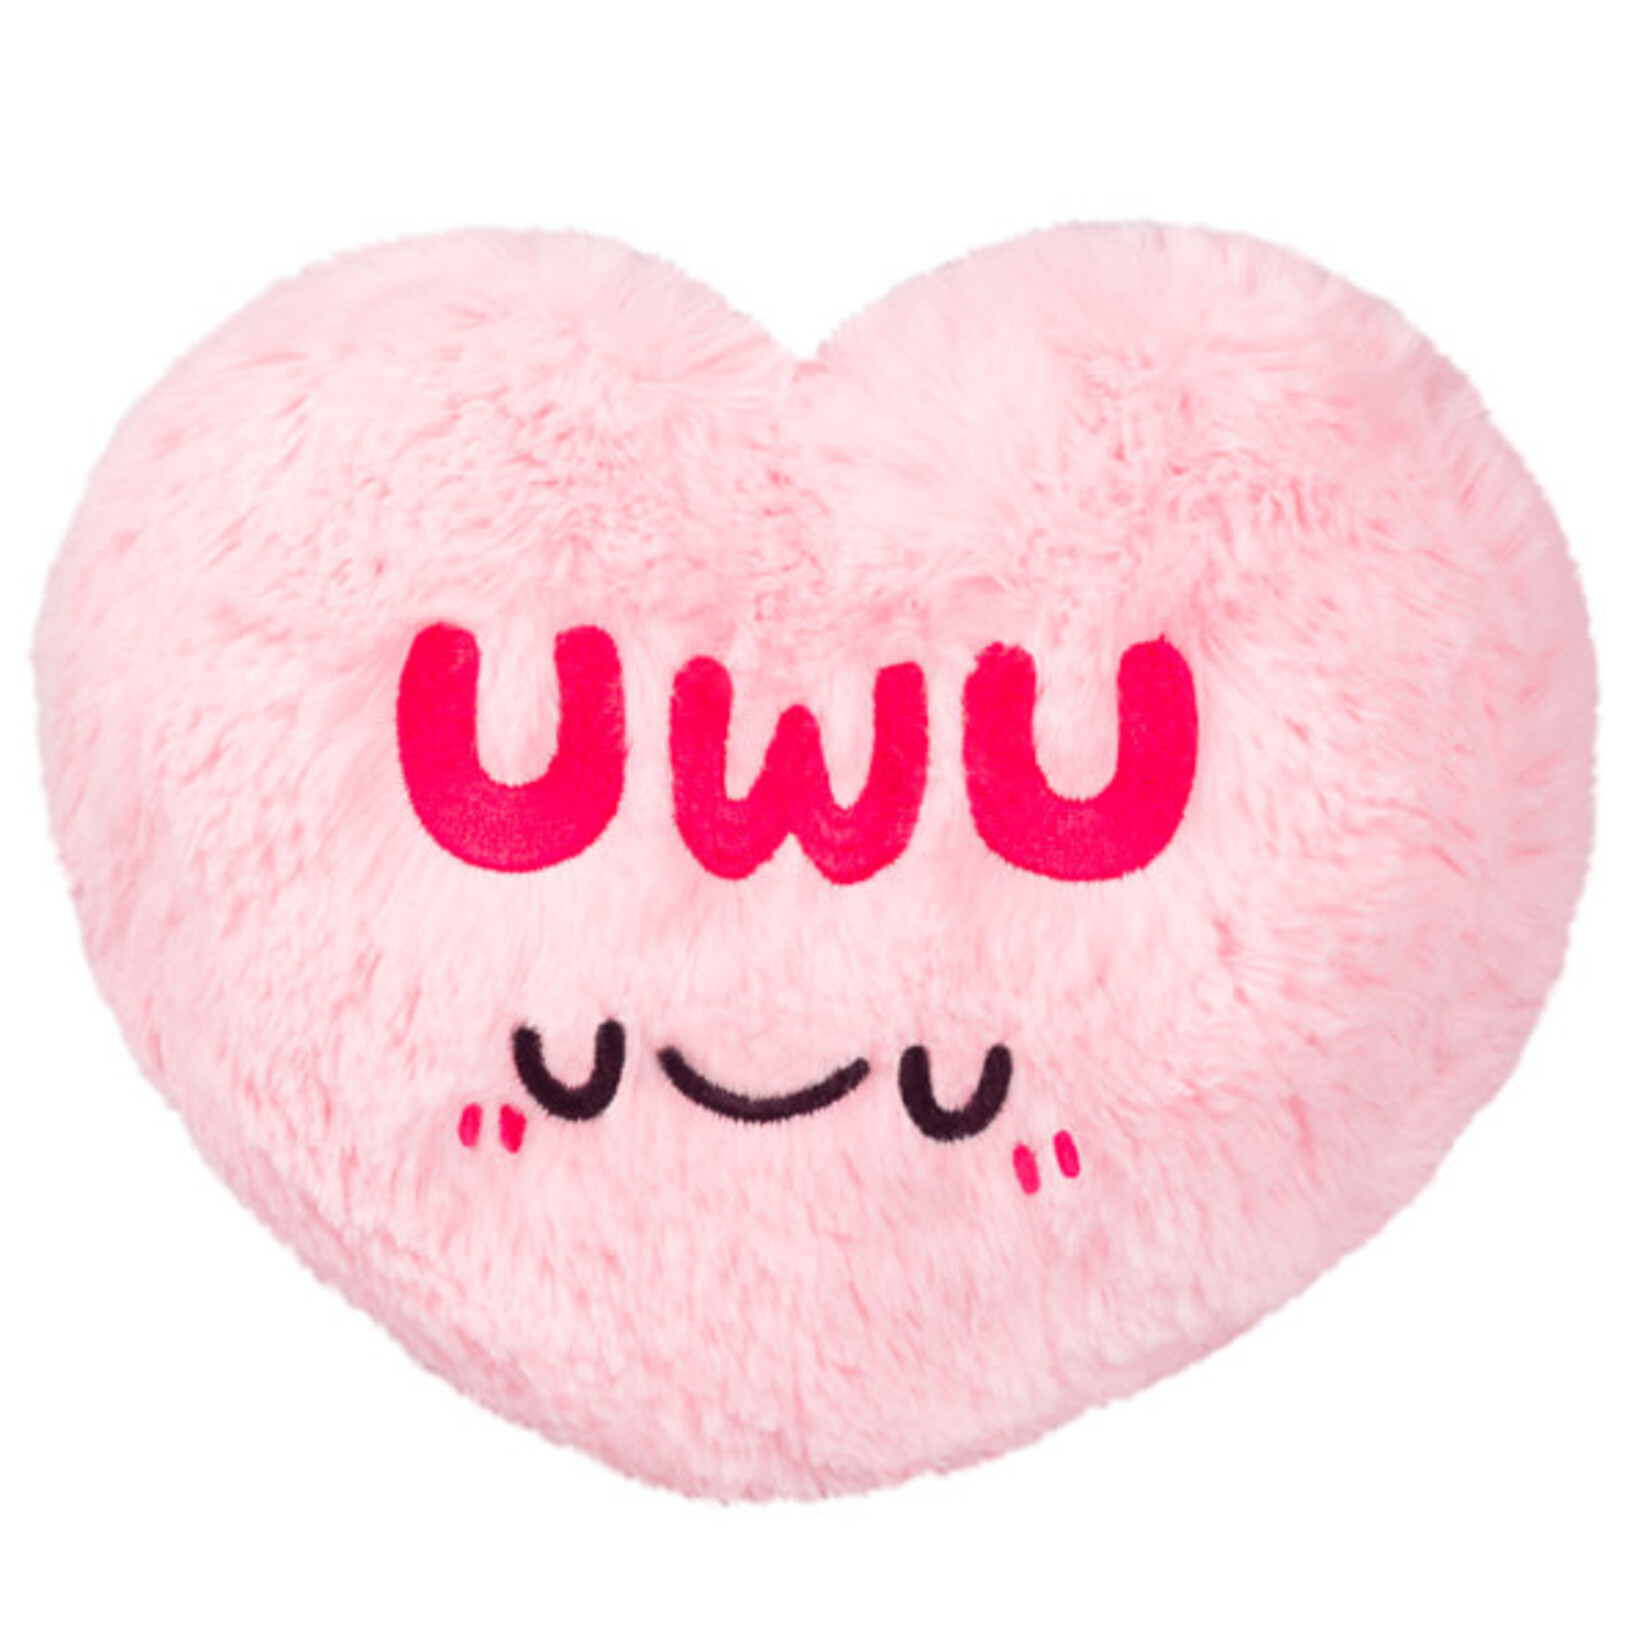 WFLW* Candy Heart